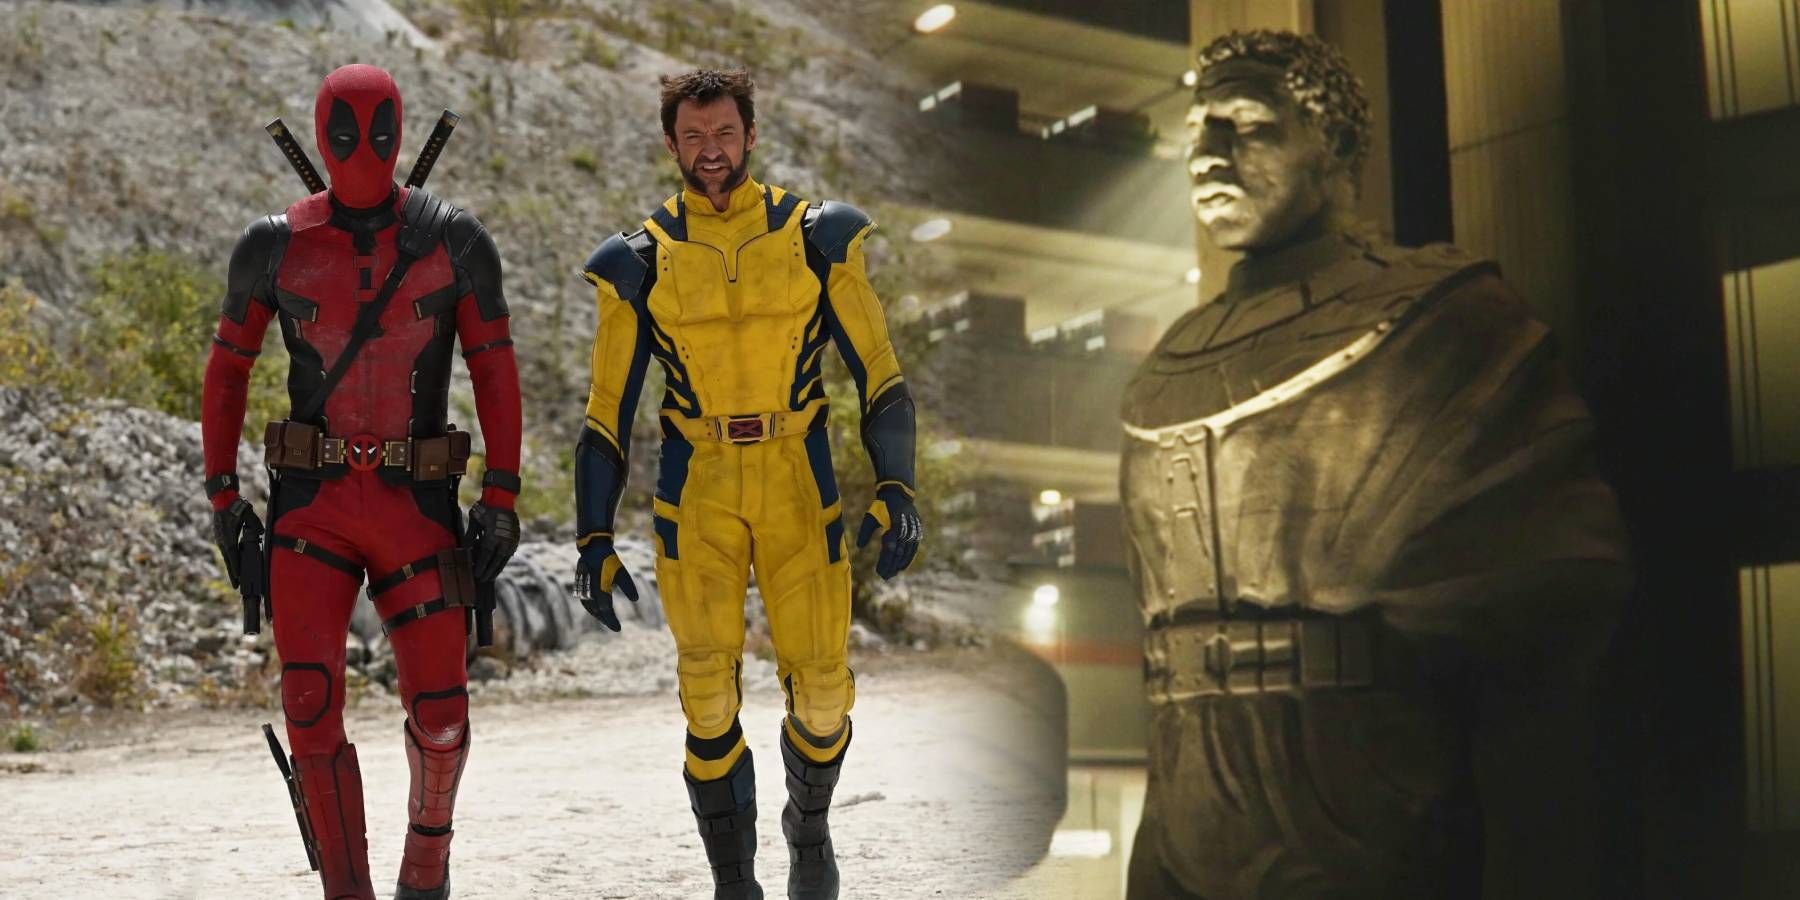 Ryan Reynolds as Deadpool and Hugh Jackman as Wolverine/Logan next to a statue of Kang/He Who Remains at the TVA from Loki